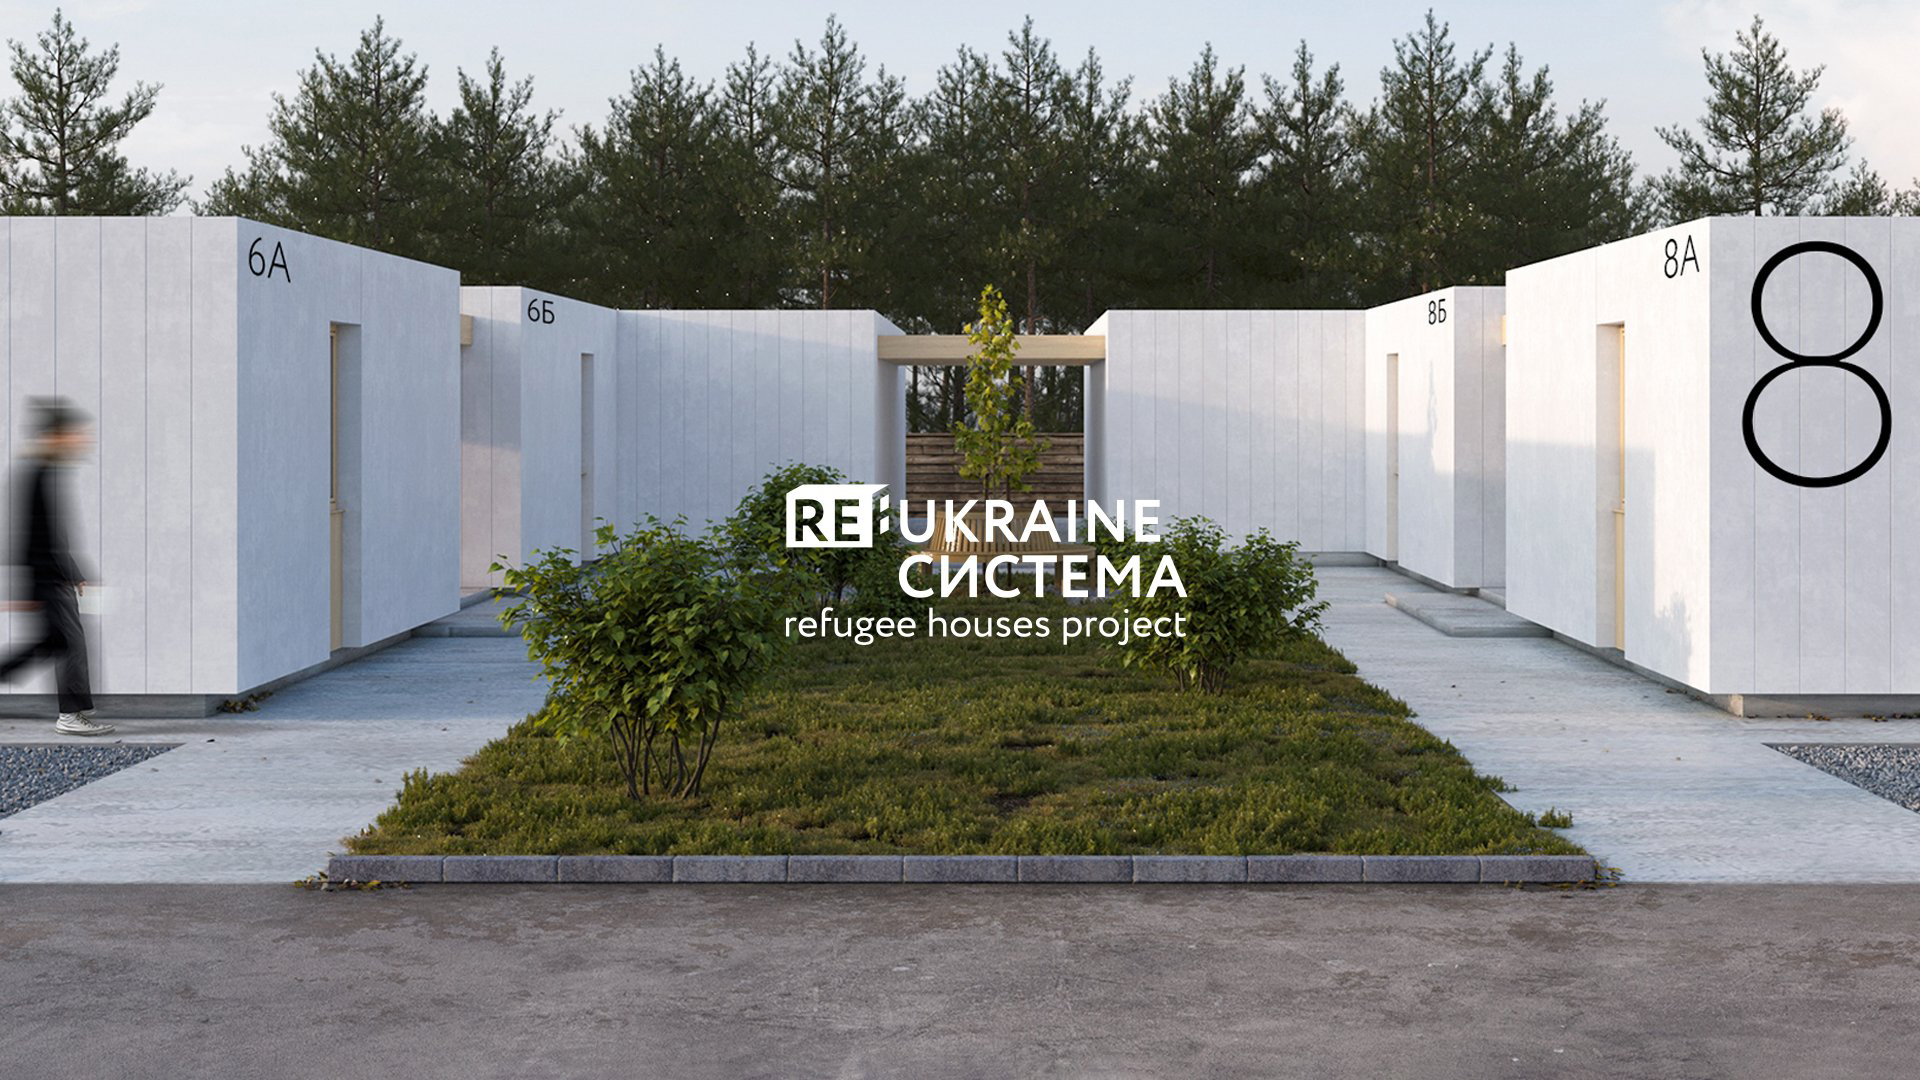 This modular housing allows thousands of Ukrainian refugees to be accommodated